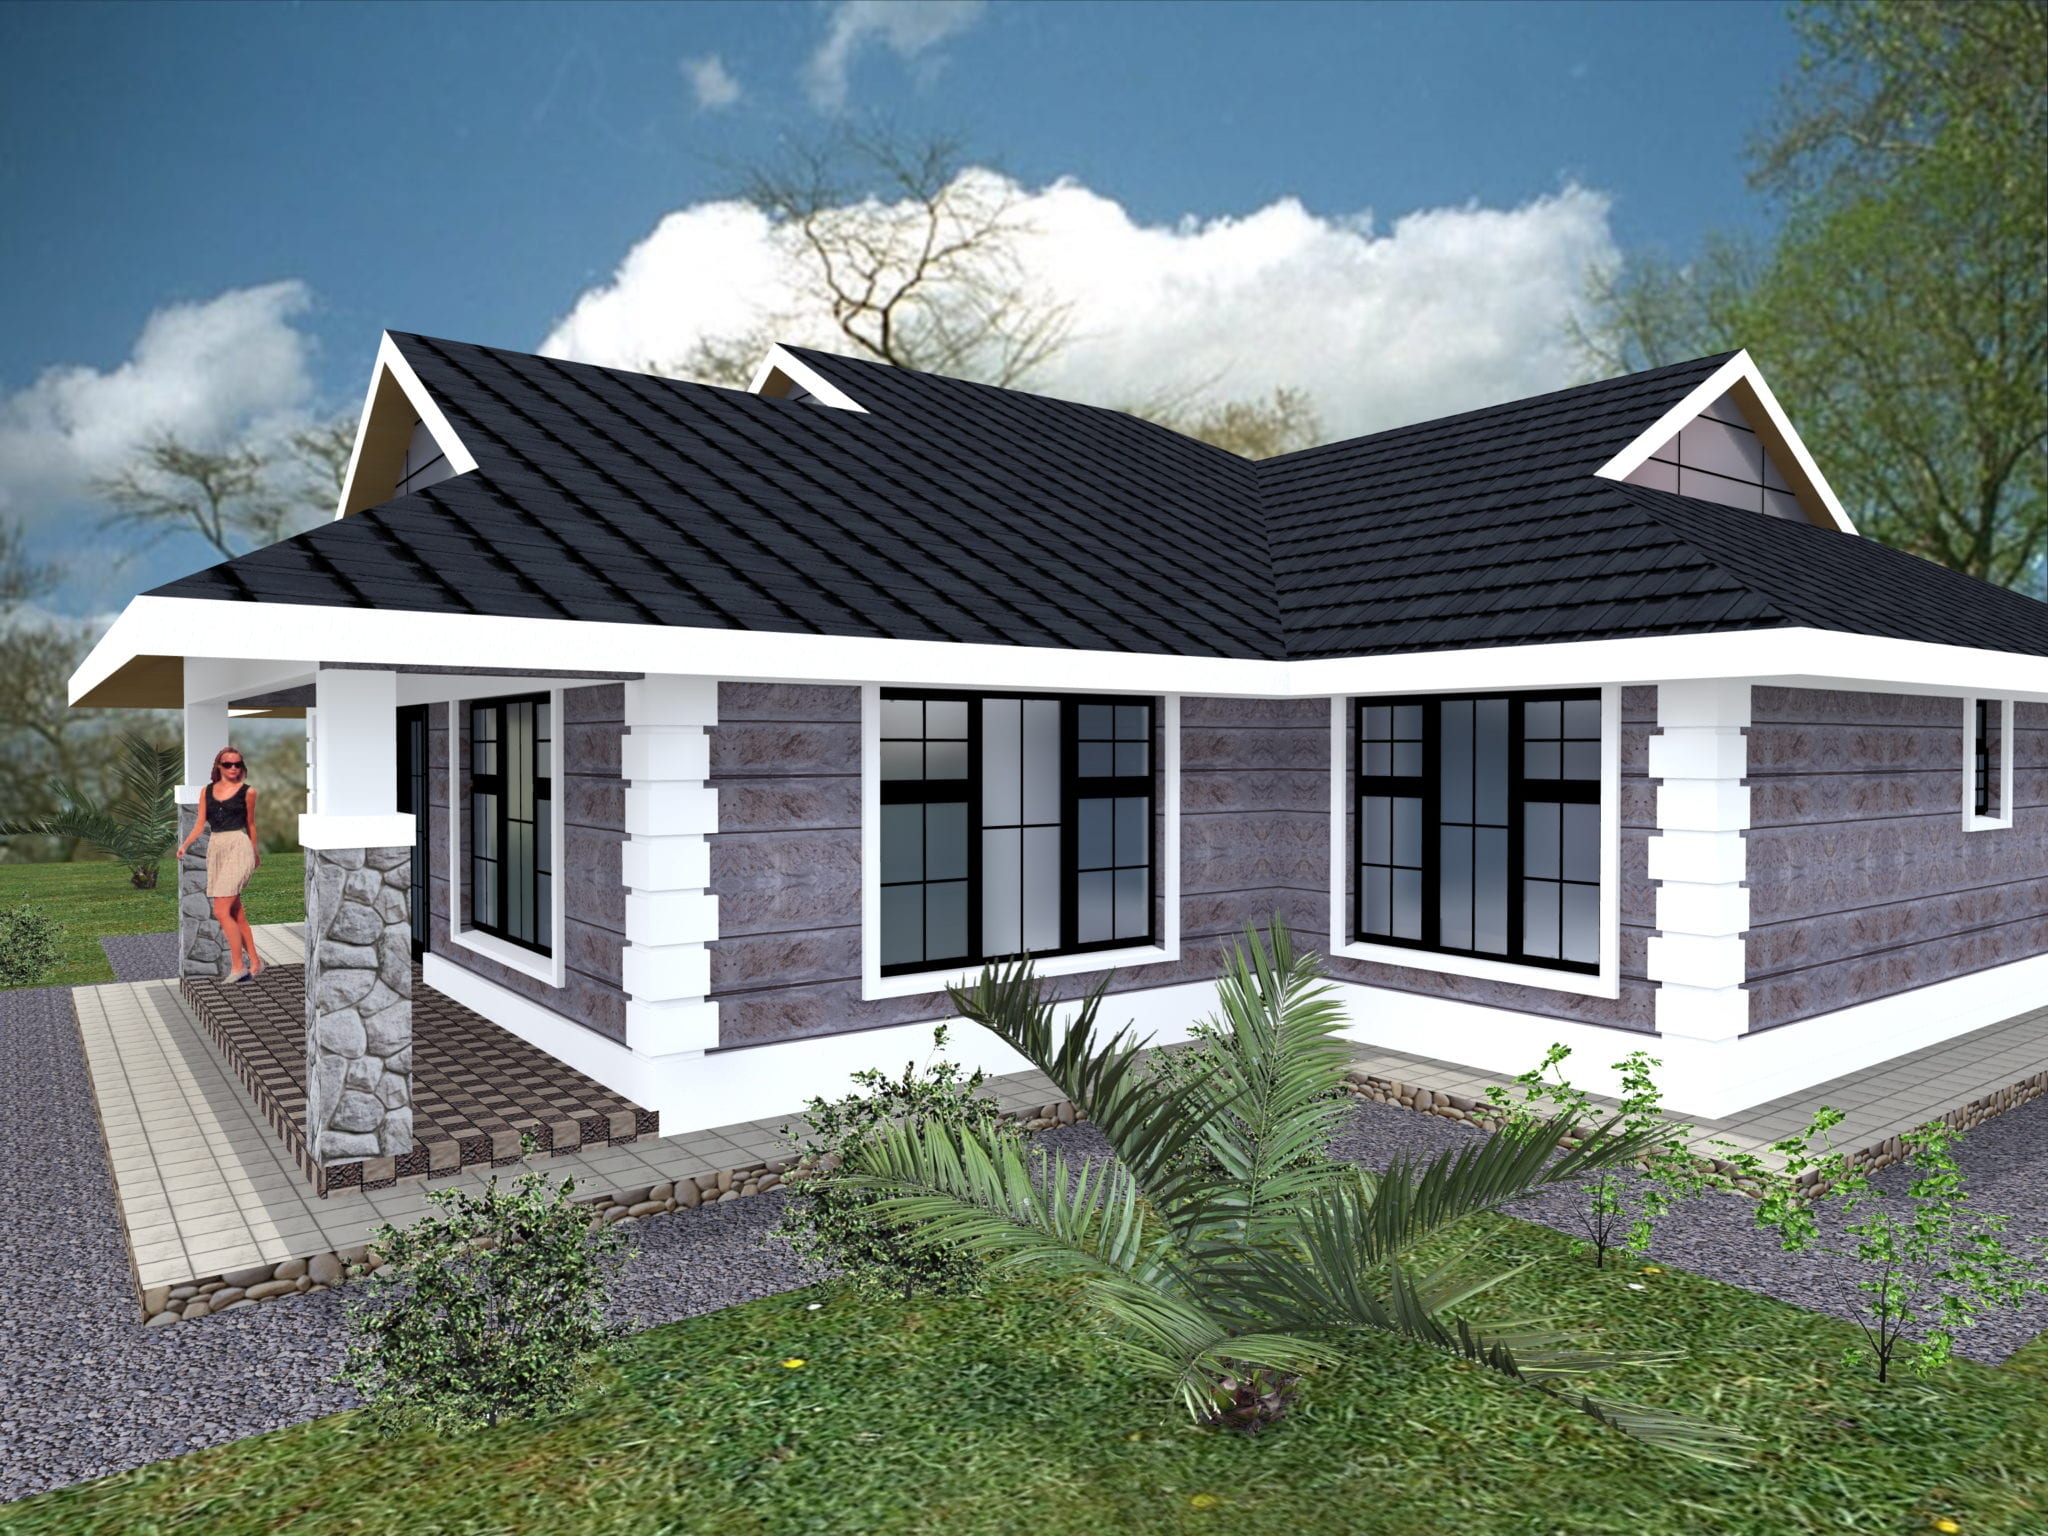 Simple 5  bedroom  house  plans  design  HPD Consult